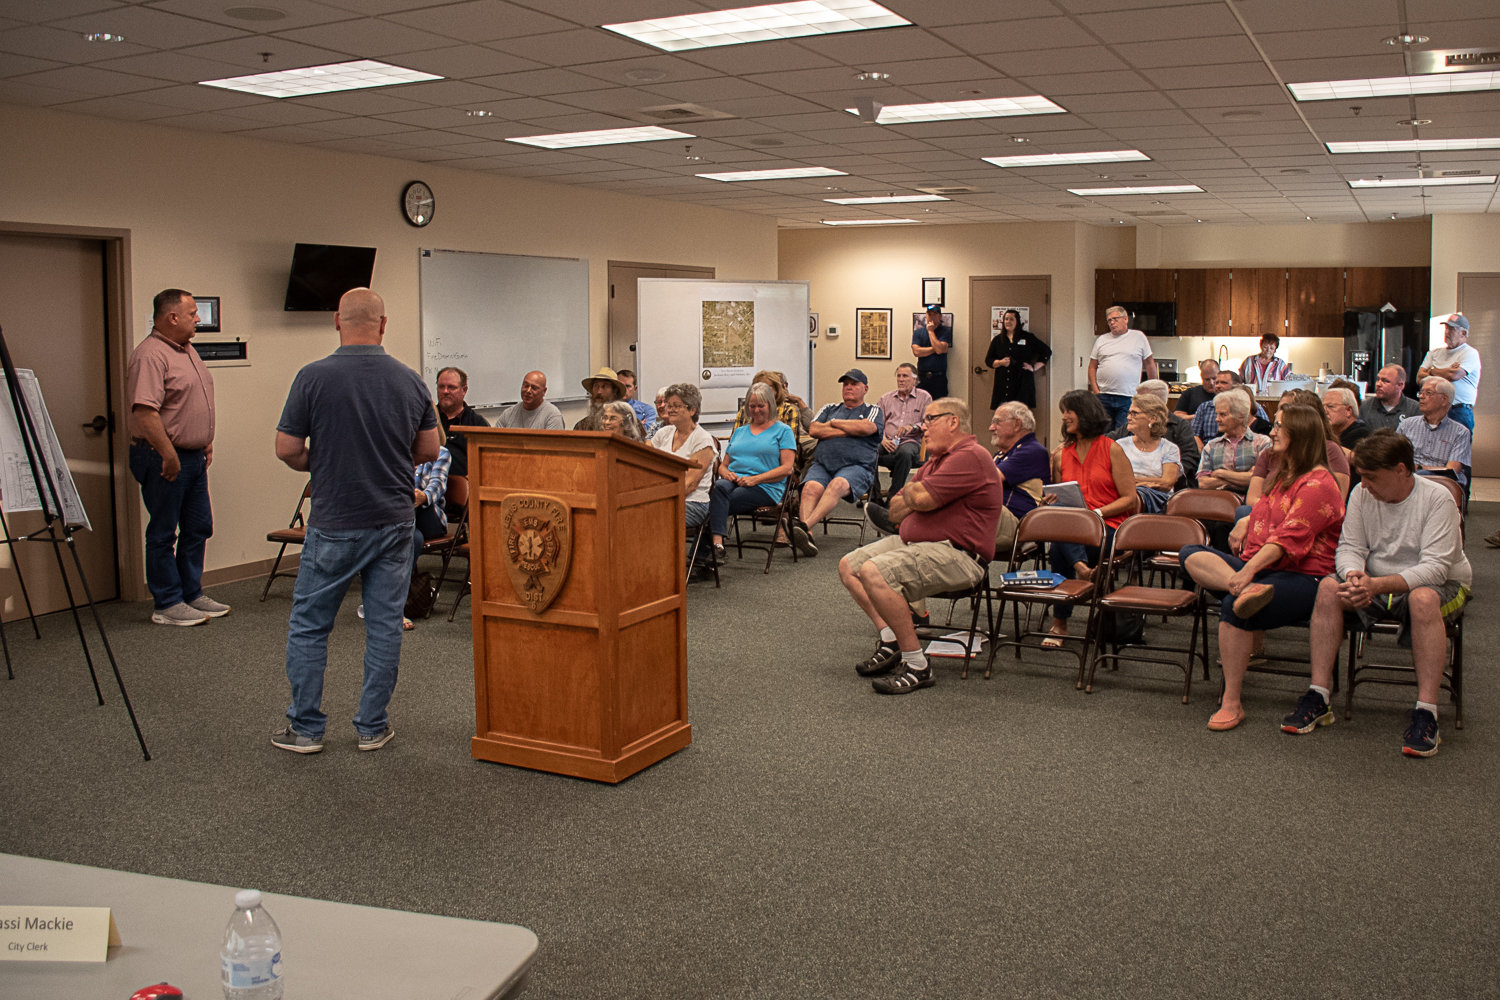 K&W Properties LLC Owner Karl Werner (left) and Project Engineer Bob Balmelli (right) stand in front and begin to field questions and concerns being raised by residents in the area.